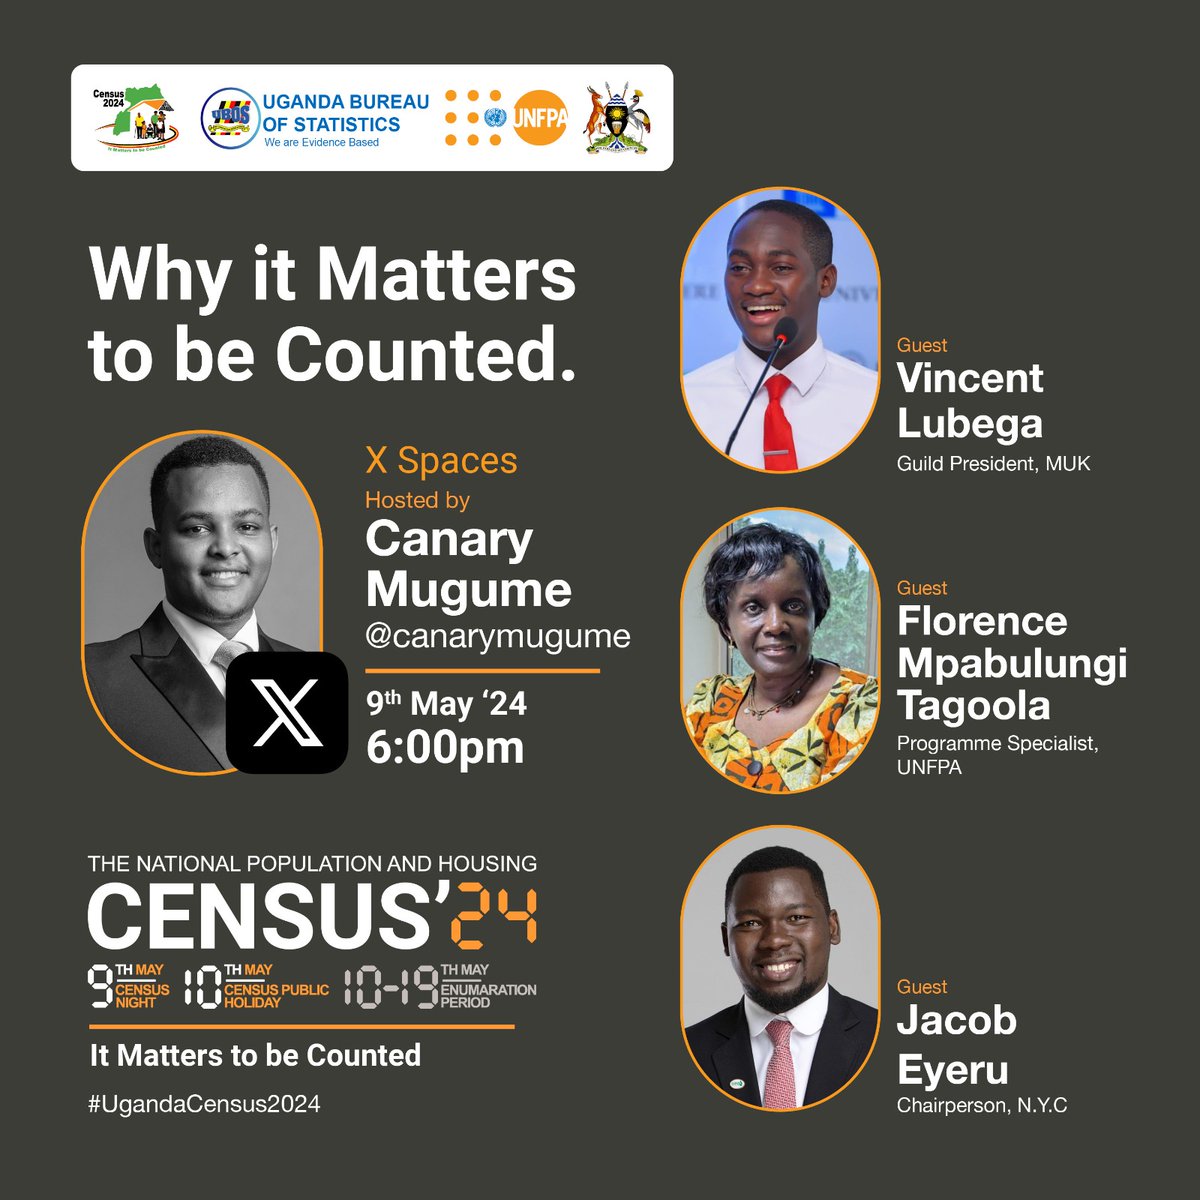 @CanaryMugume is hosting a X space just few minutes from now, joined by some guests. Let's all join the space and know why we should all be counted. #UgandaCensus2024. It matters to be counted. @UNFPAUganda @Jozhane